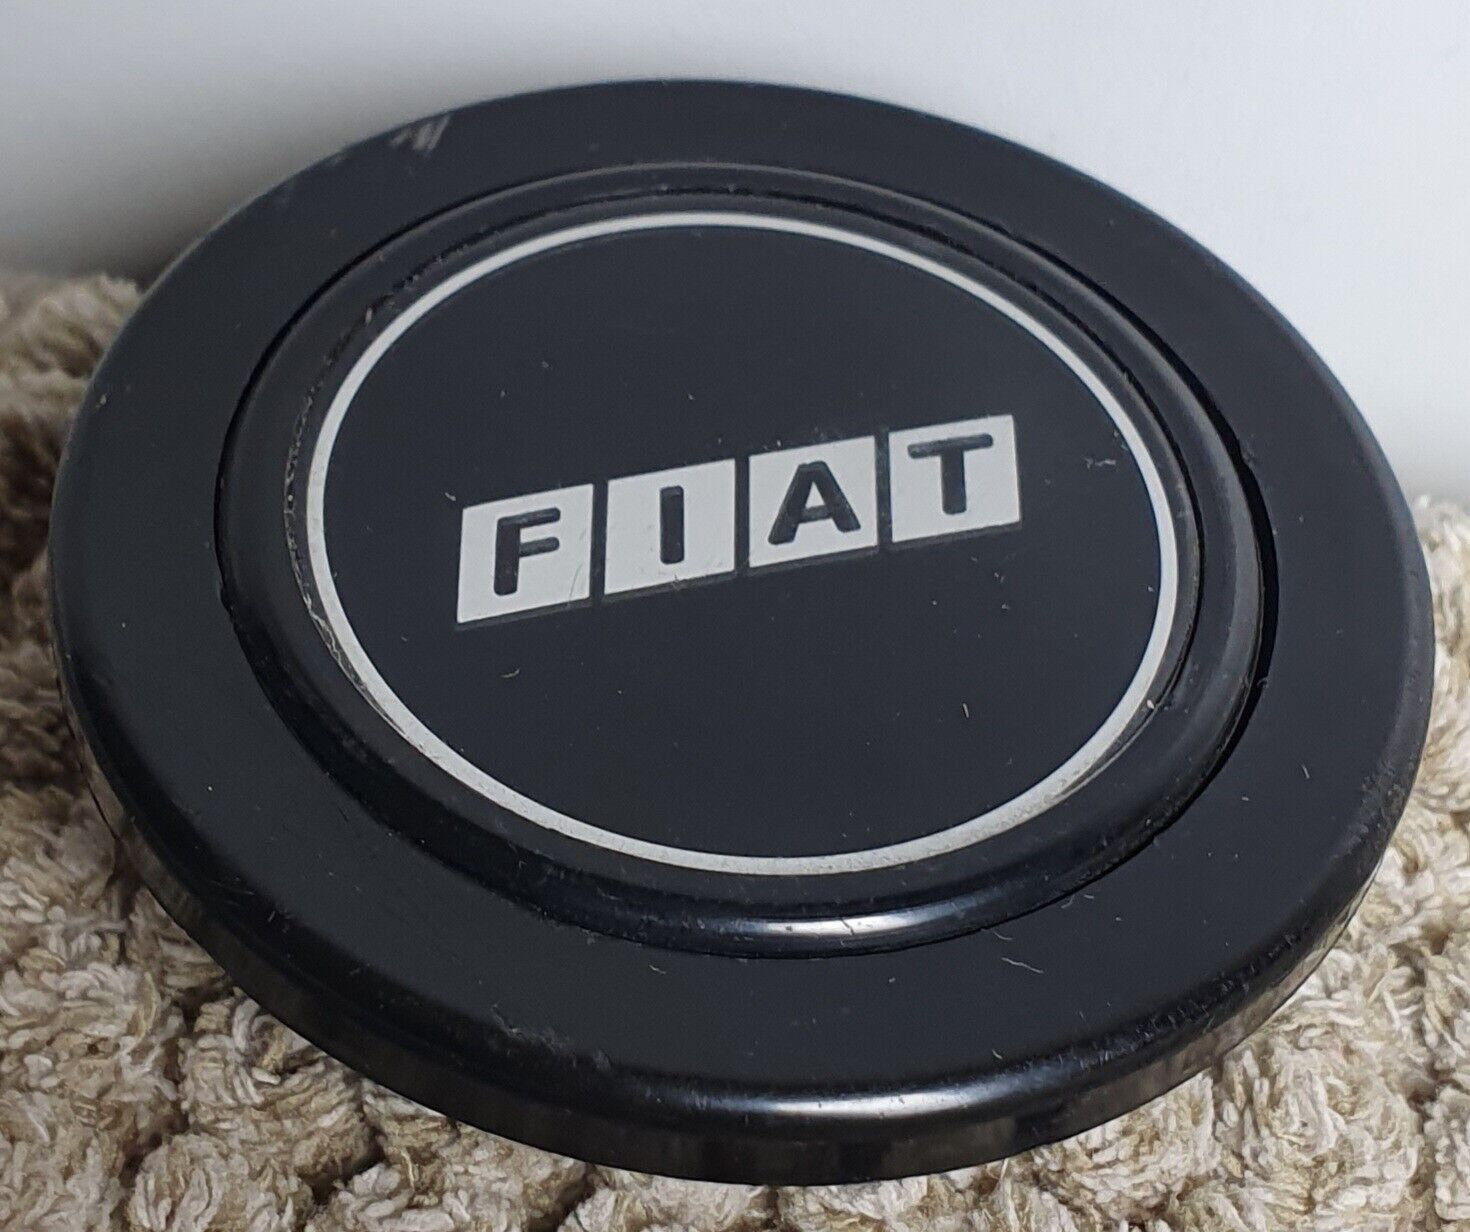 FIAT horn button fits for MOMO RAID Victor steering wheel Fiat 500 Punto Uno